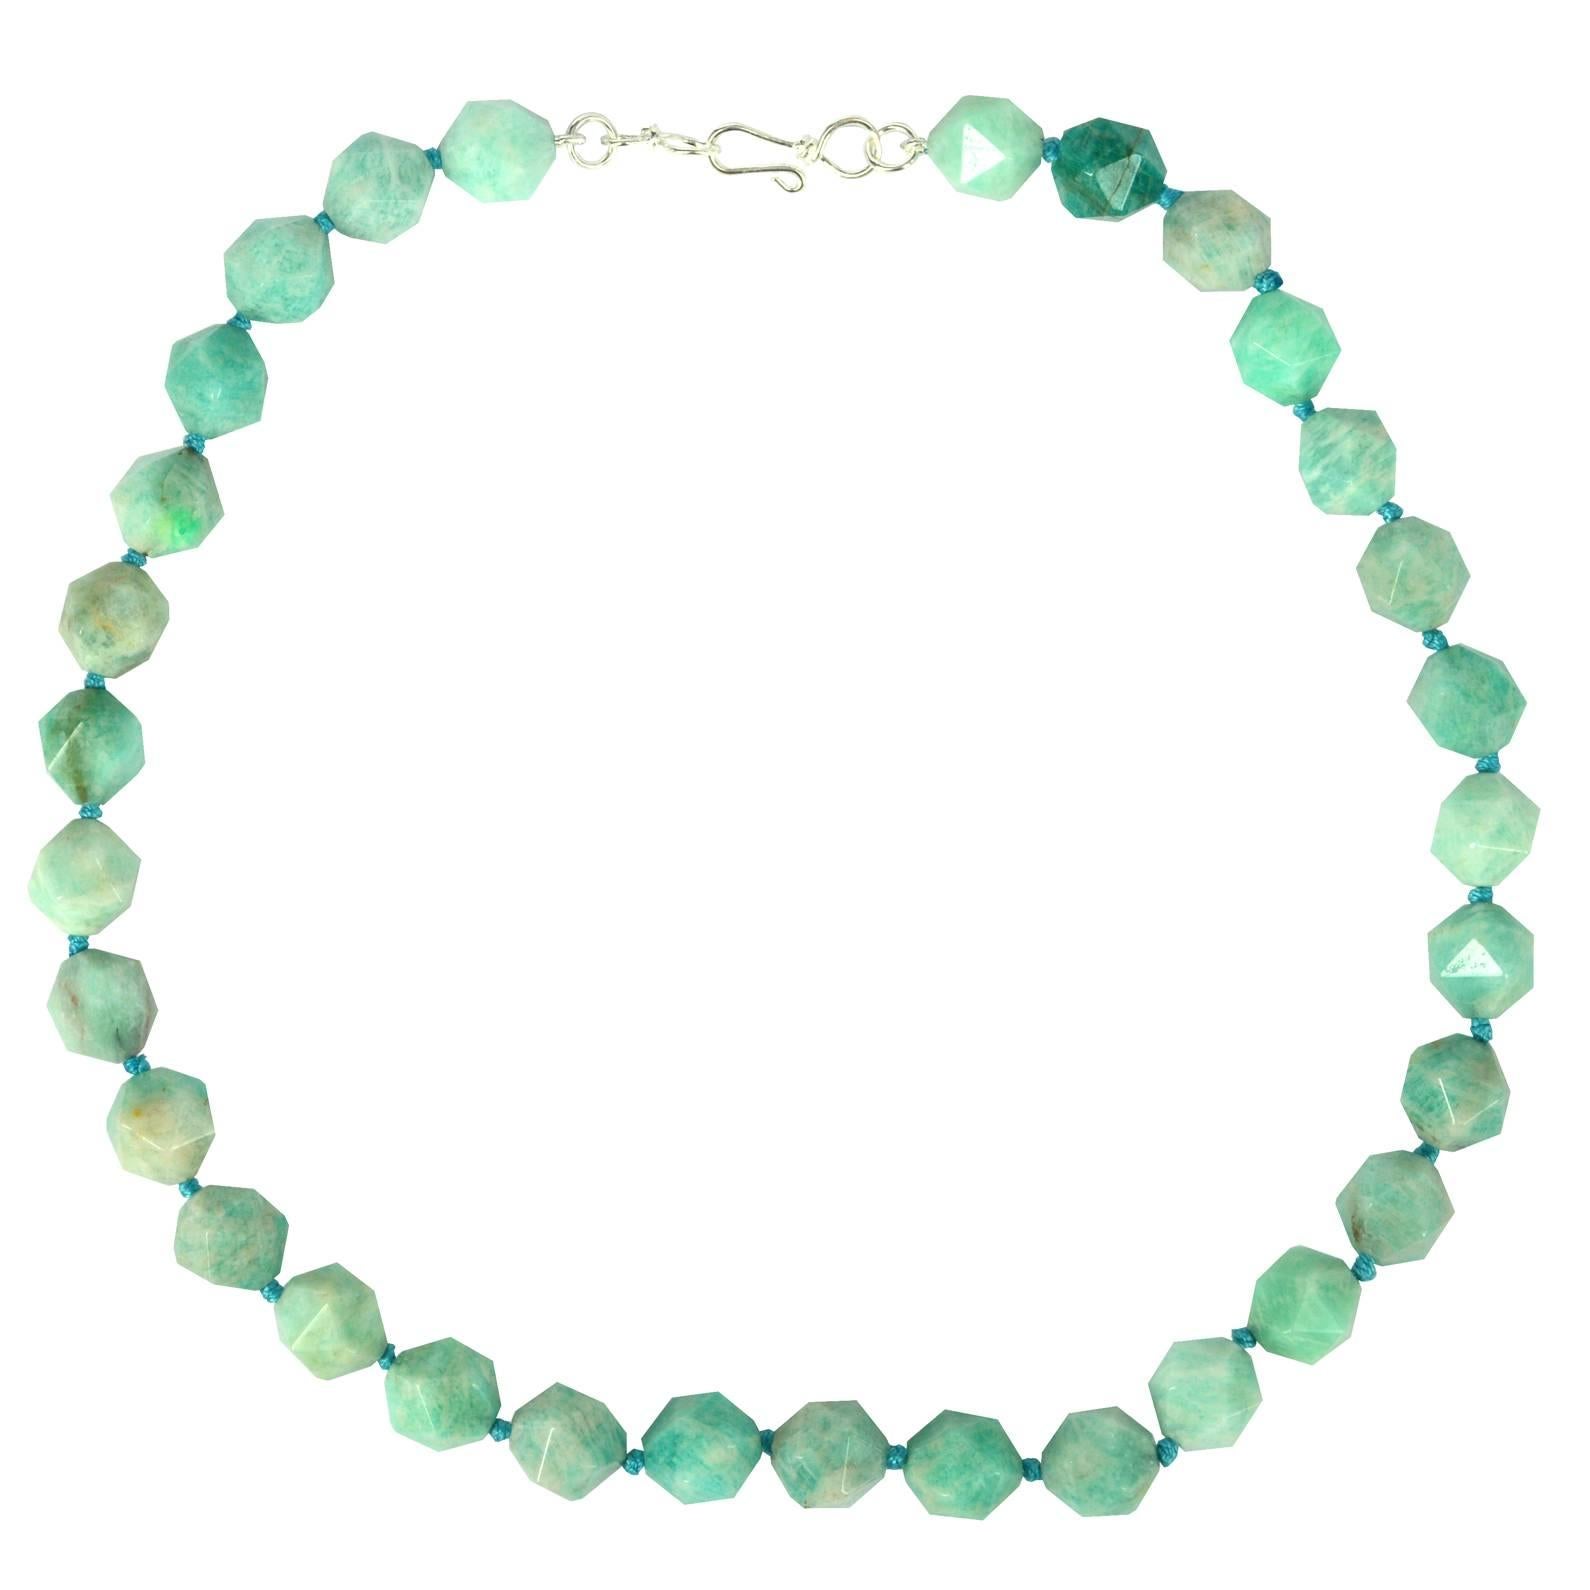 Amazonite Faceted star cut 10mm with a 40mm Sterling Silver hook Clasp 32 beads total.

Finished necklace measures 47.5cm.

Custom modification available on request
Hand knotted on Aqua colored  thread for strength and durability 




